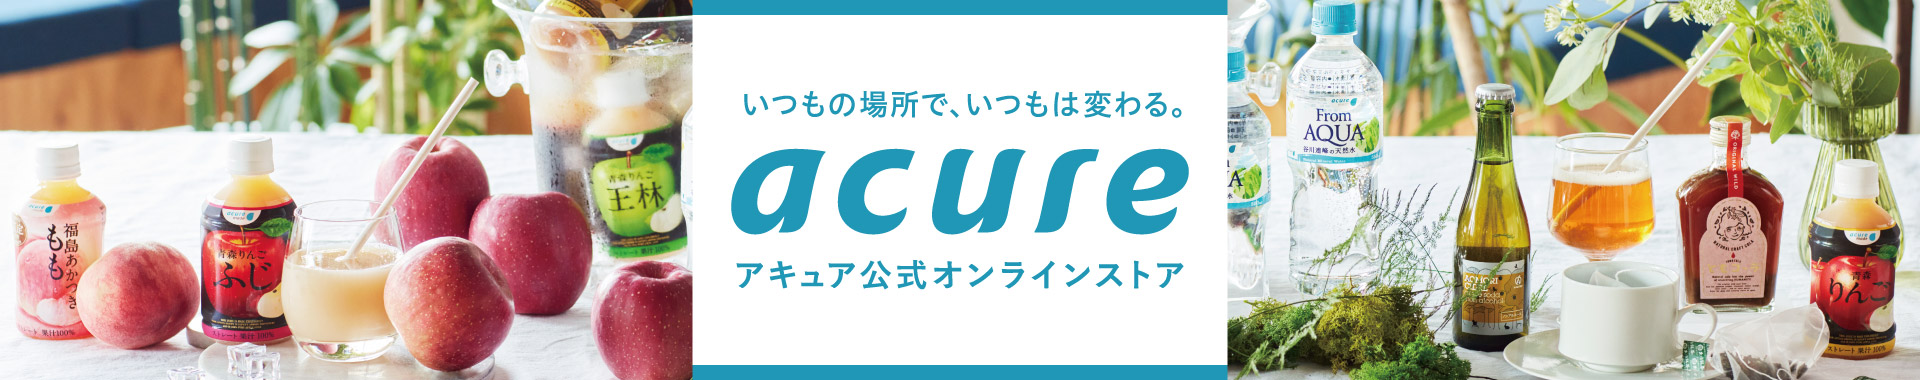 acure ＜ acure ＞ Official online store